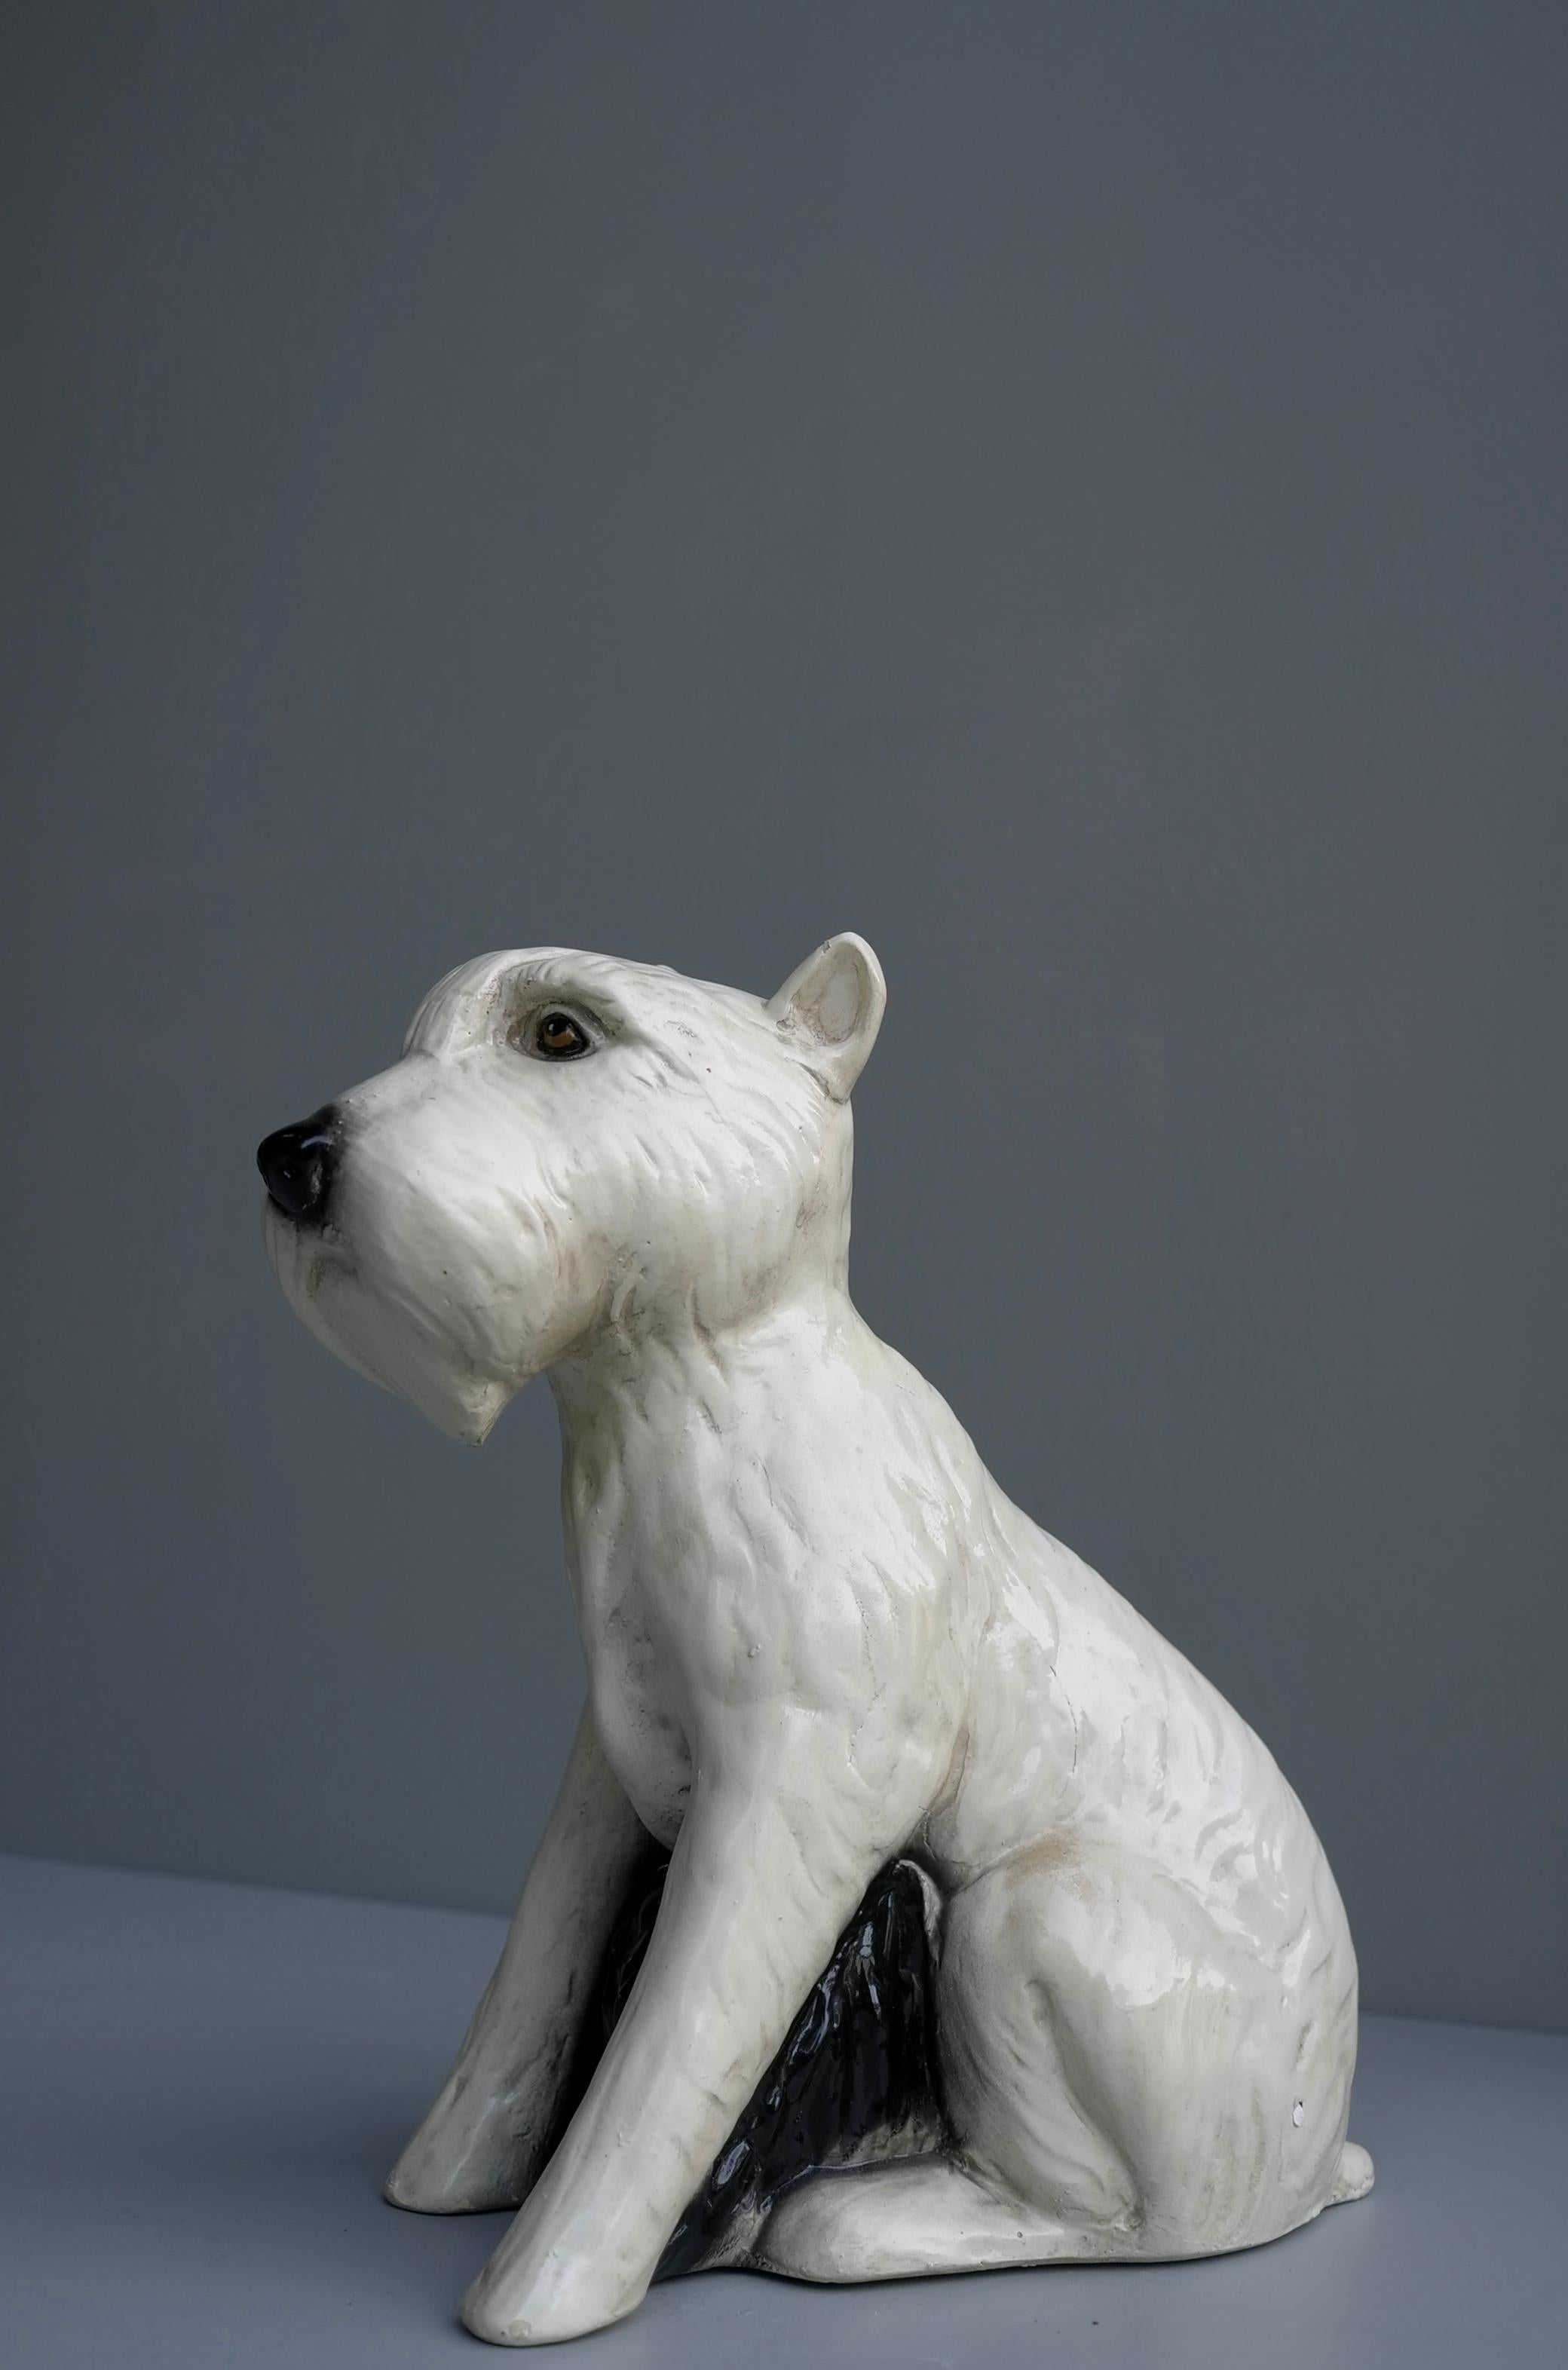 Hand-Painted Hand Painted Terrier Ceramic 'Snowy' Dog Sculpture, Gaggini Silvio, Italy, 1960s